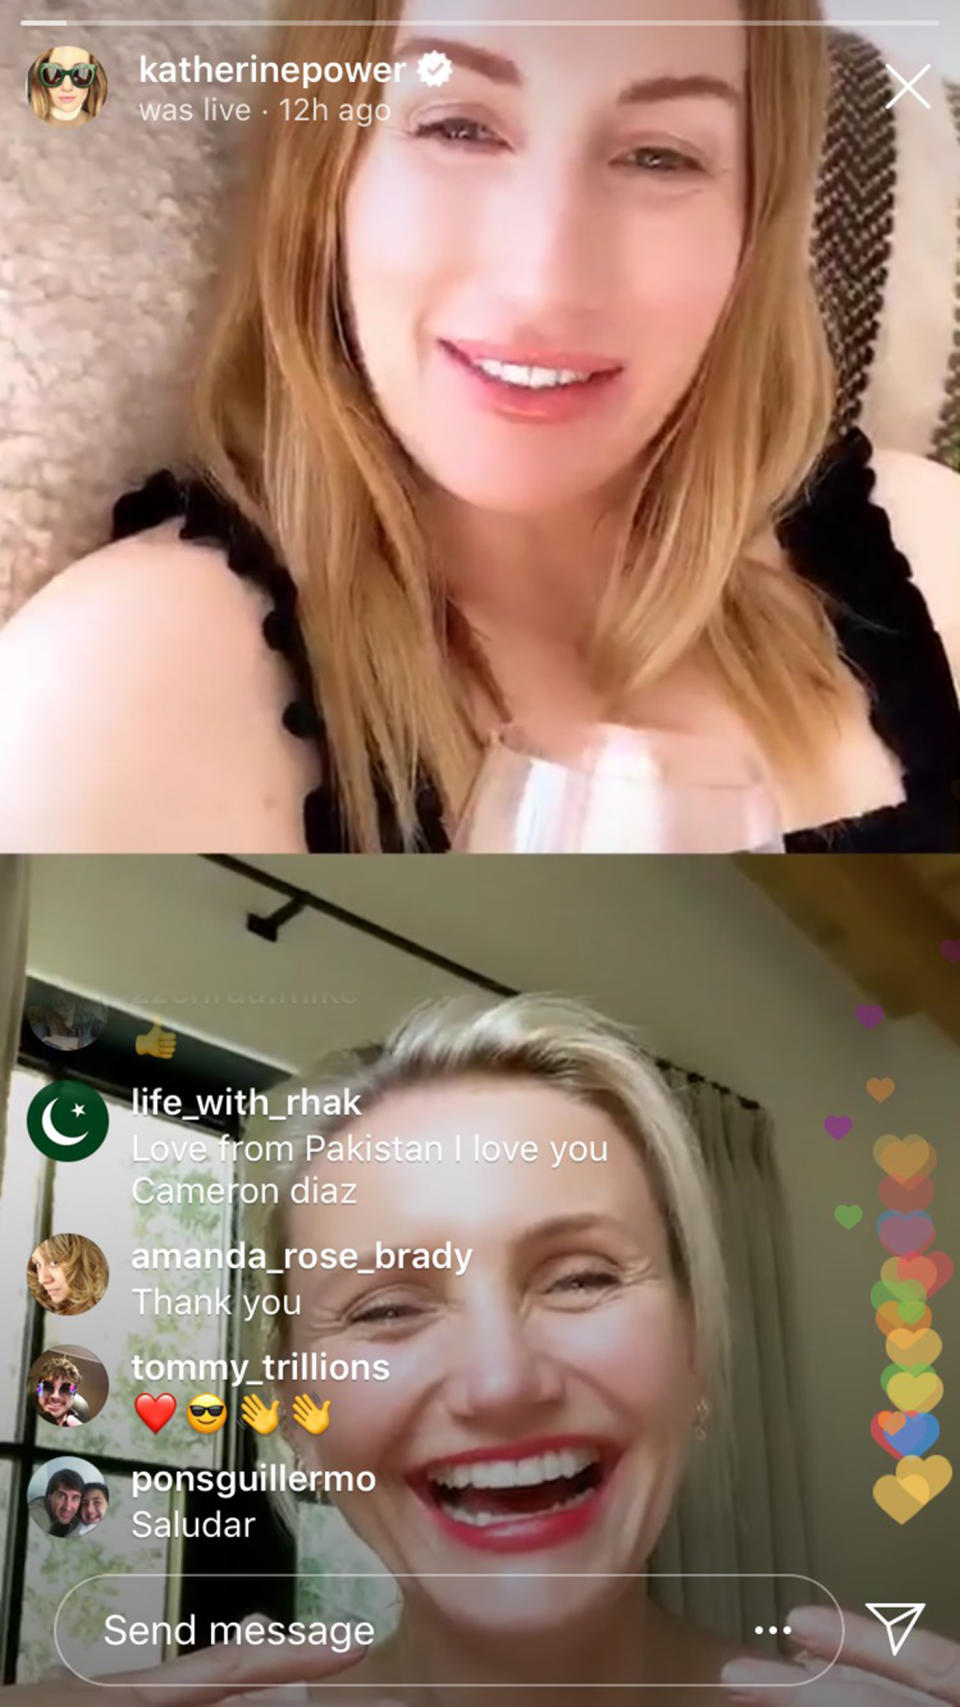 The good friends caught up during a live chat on Instagram. (Katherinepower/ Instagram)